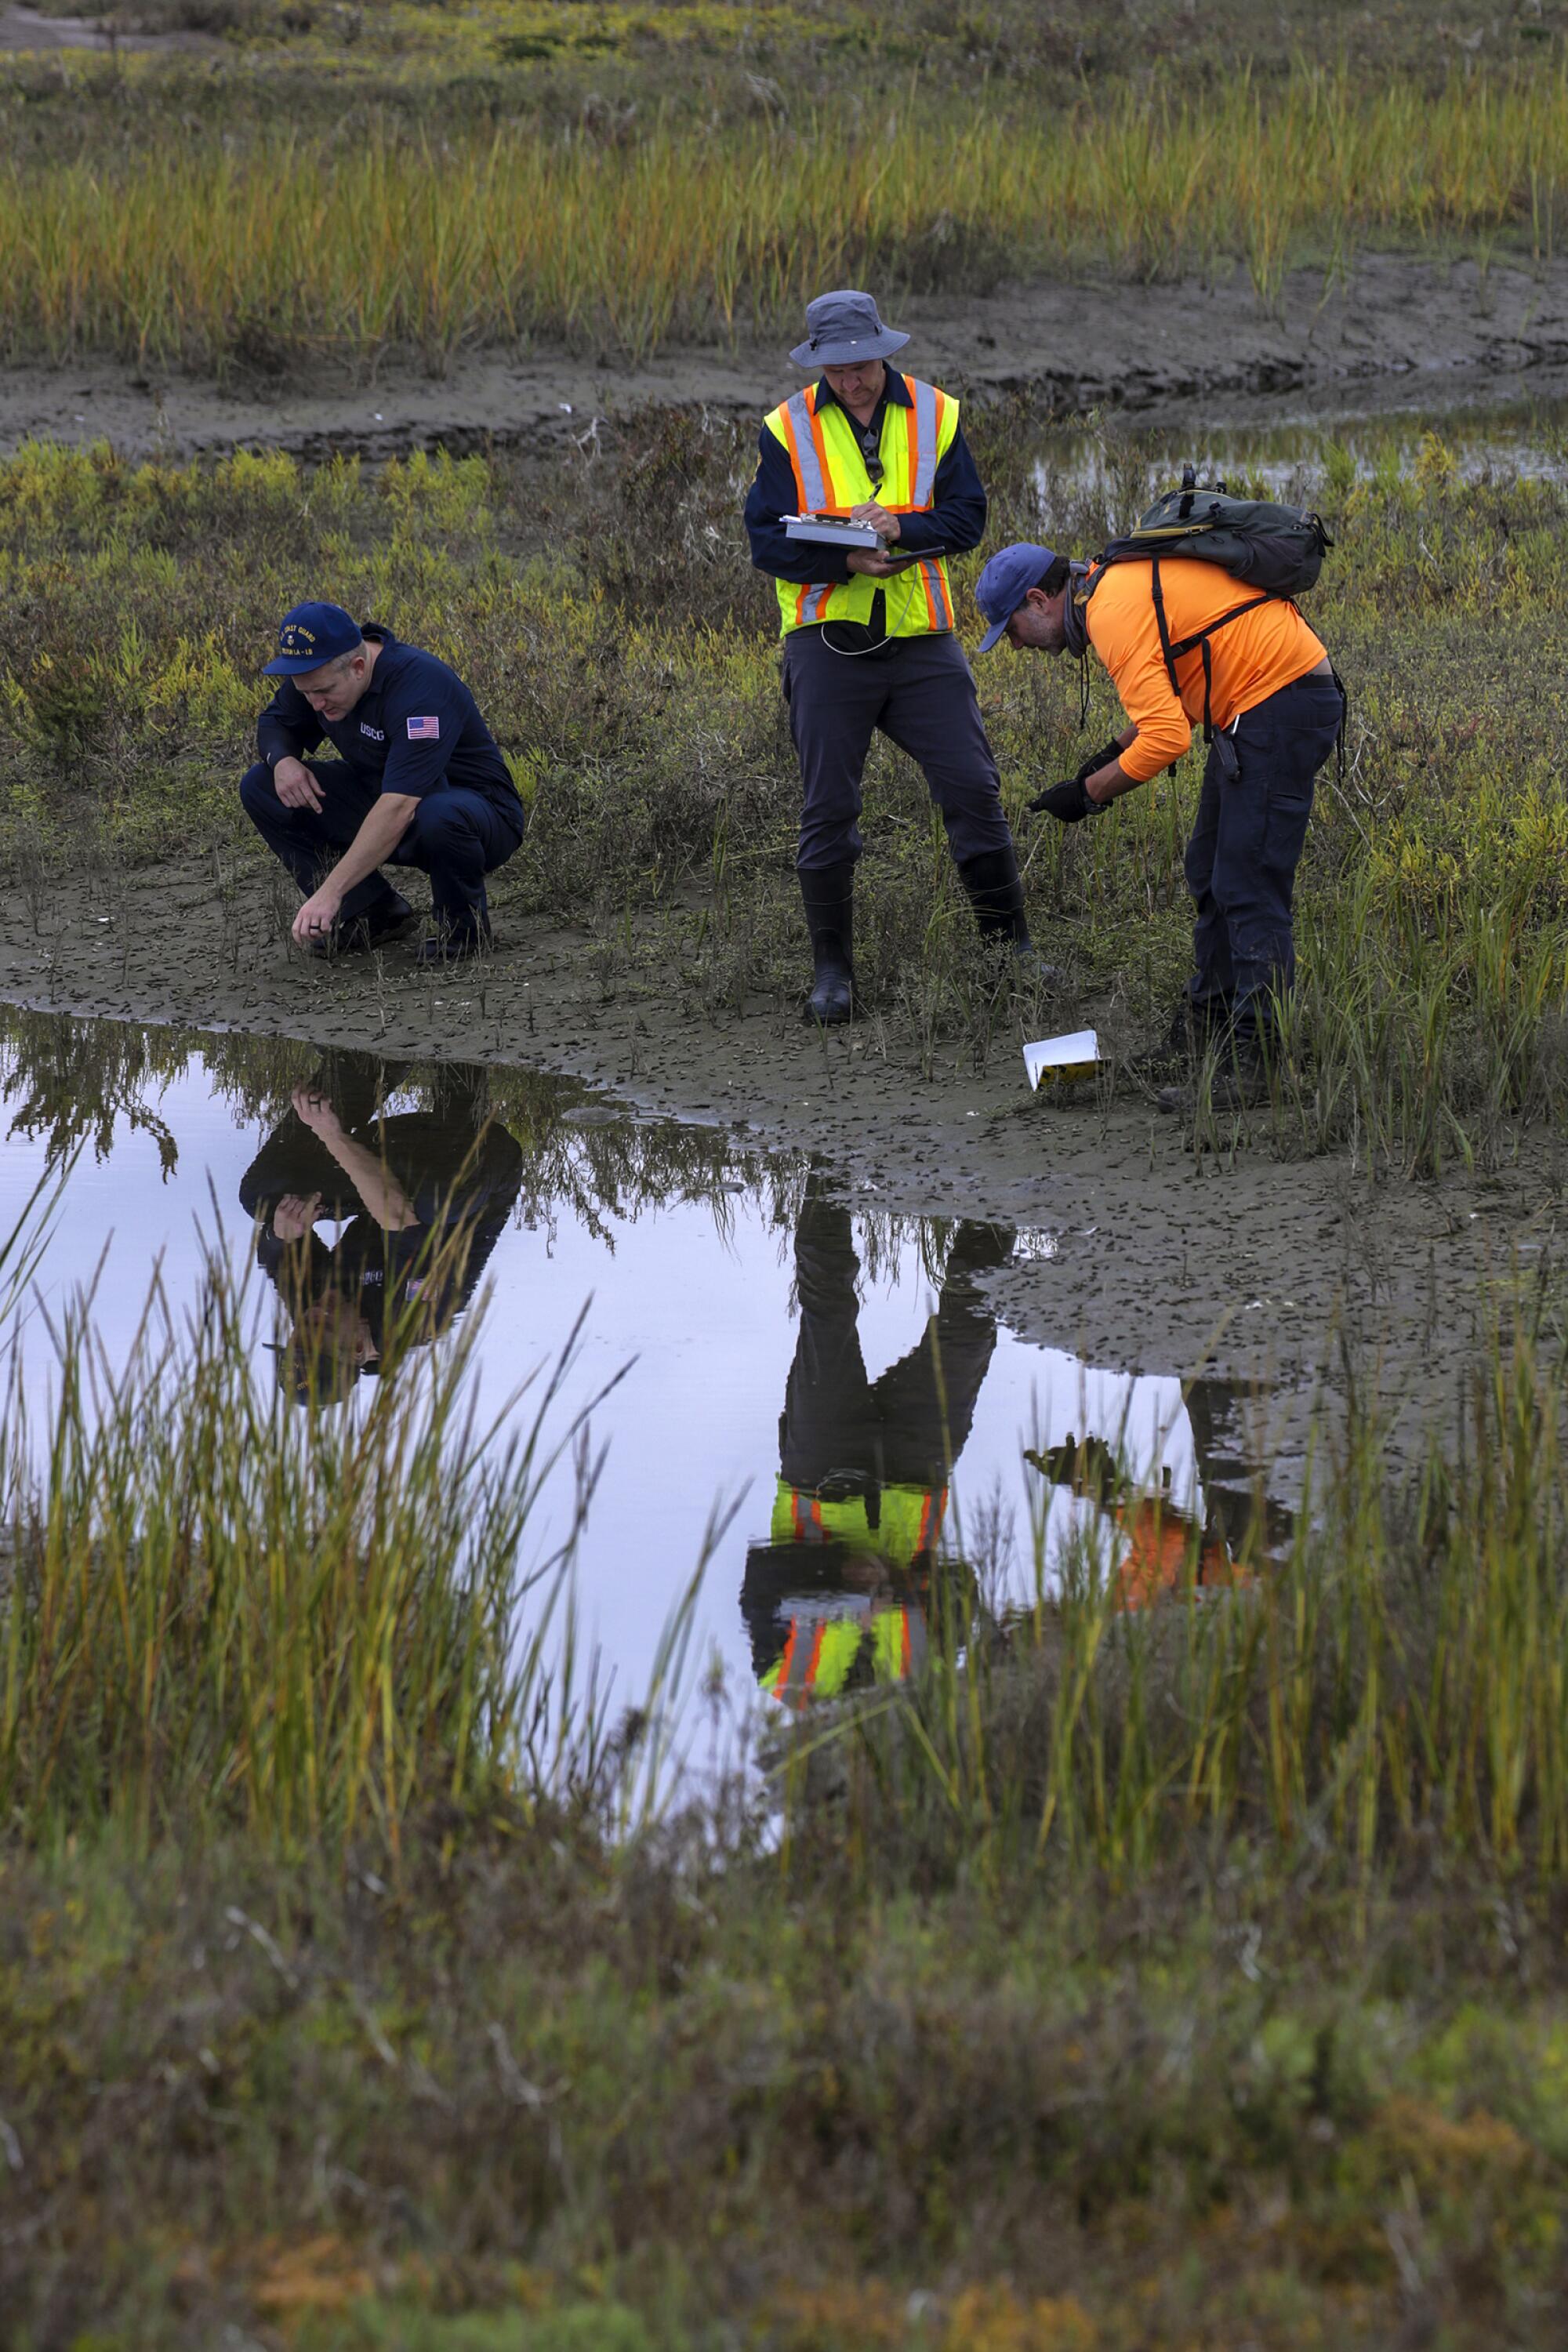 Three workers assess the oil spill damage in Talbert Marsh.